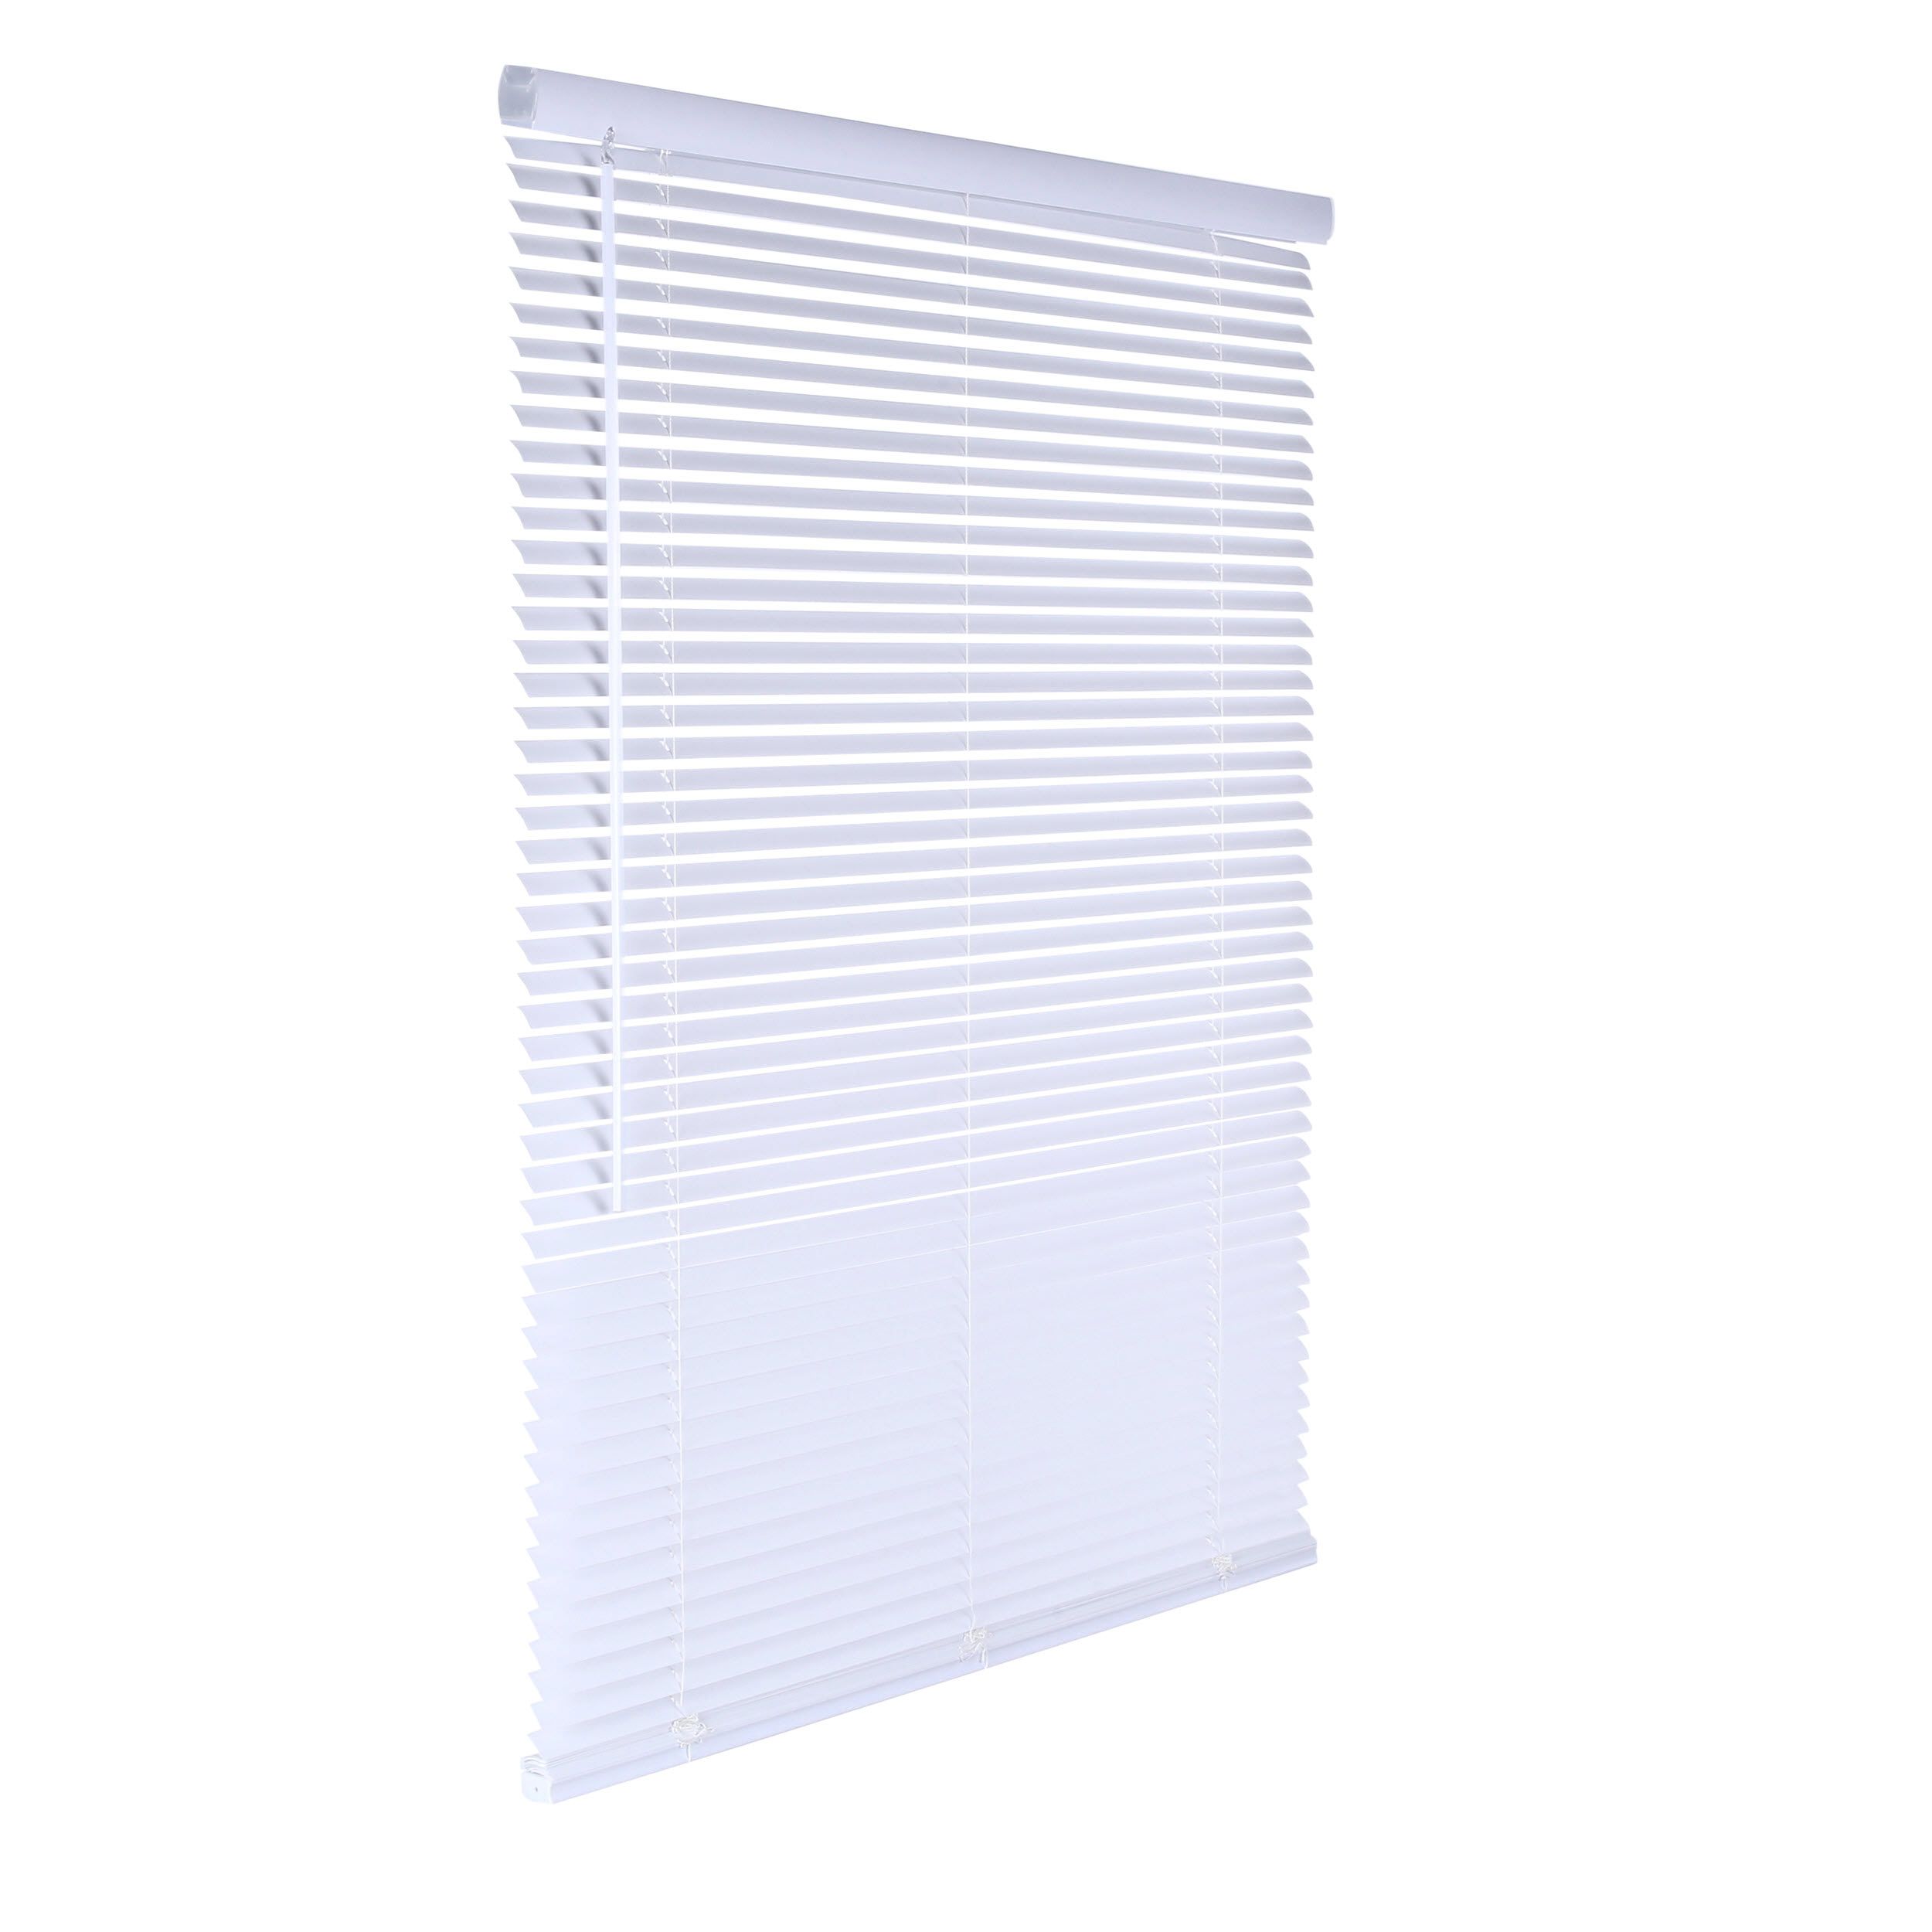 1" Cordless Mini Blinds 52 Inch Width x 64 Inch Height Model 201603001 